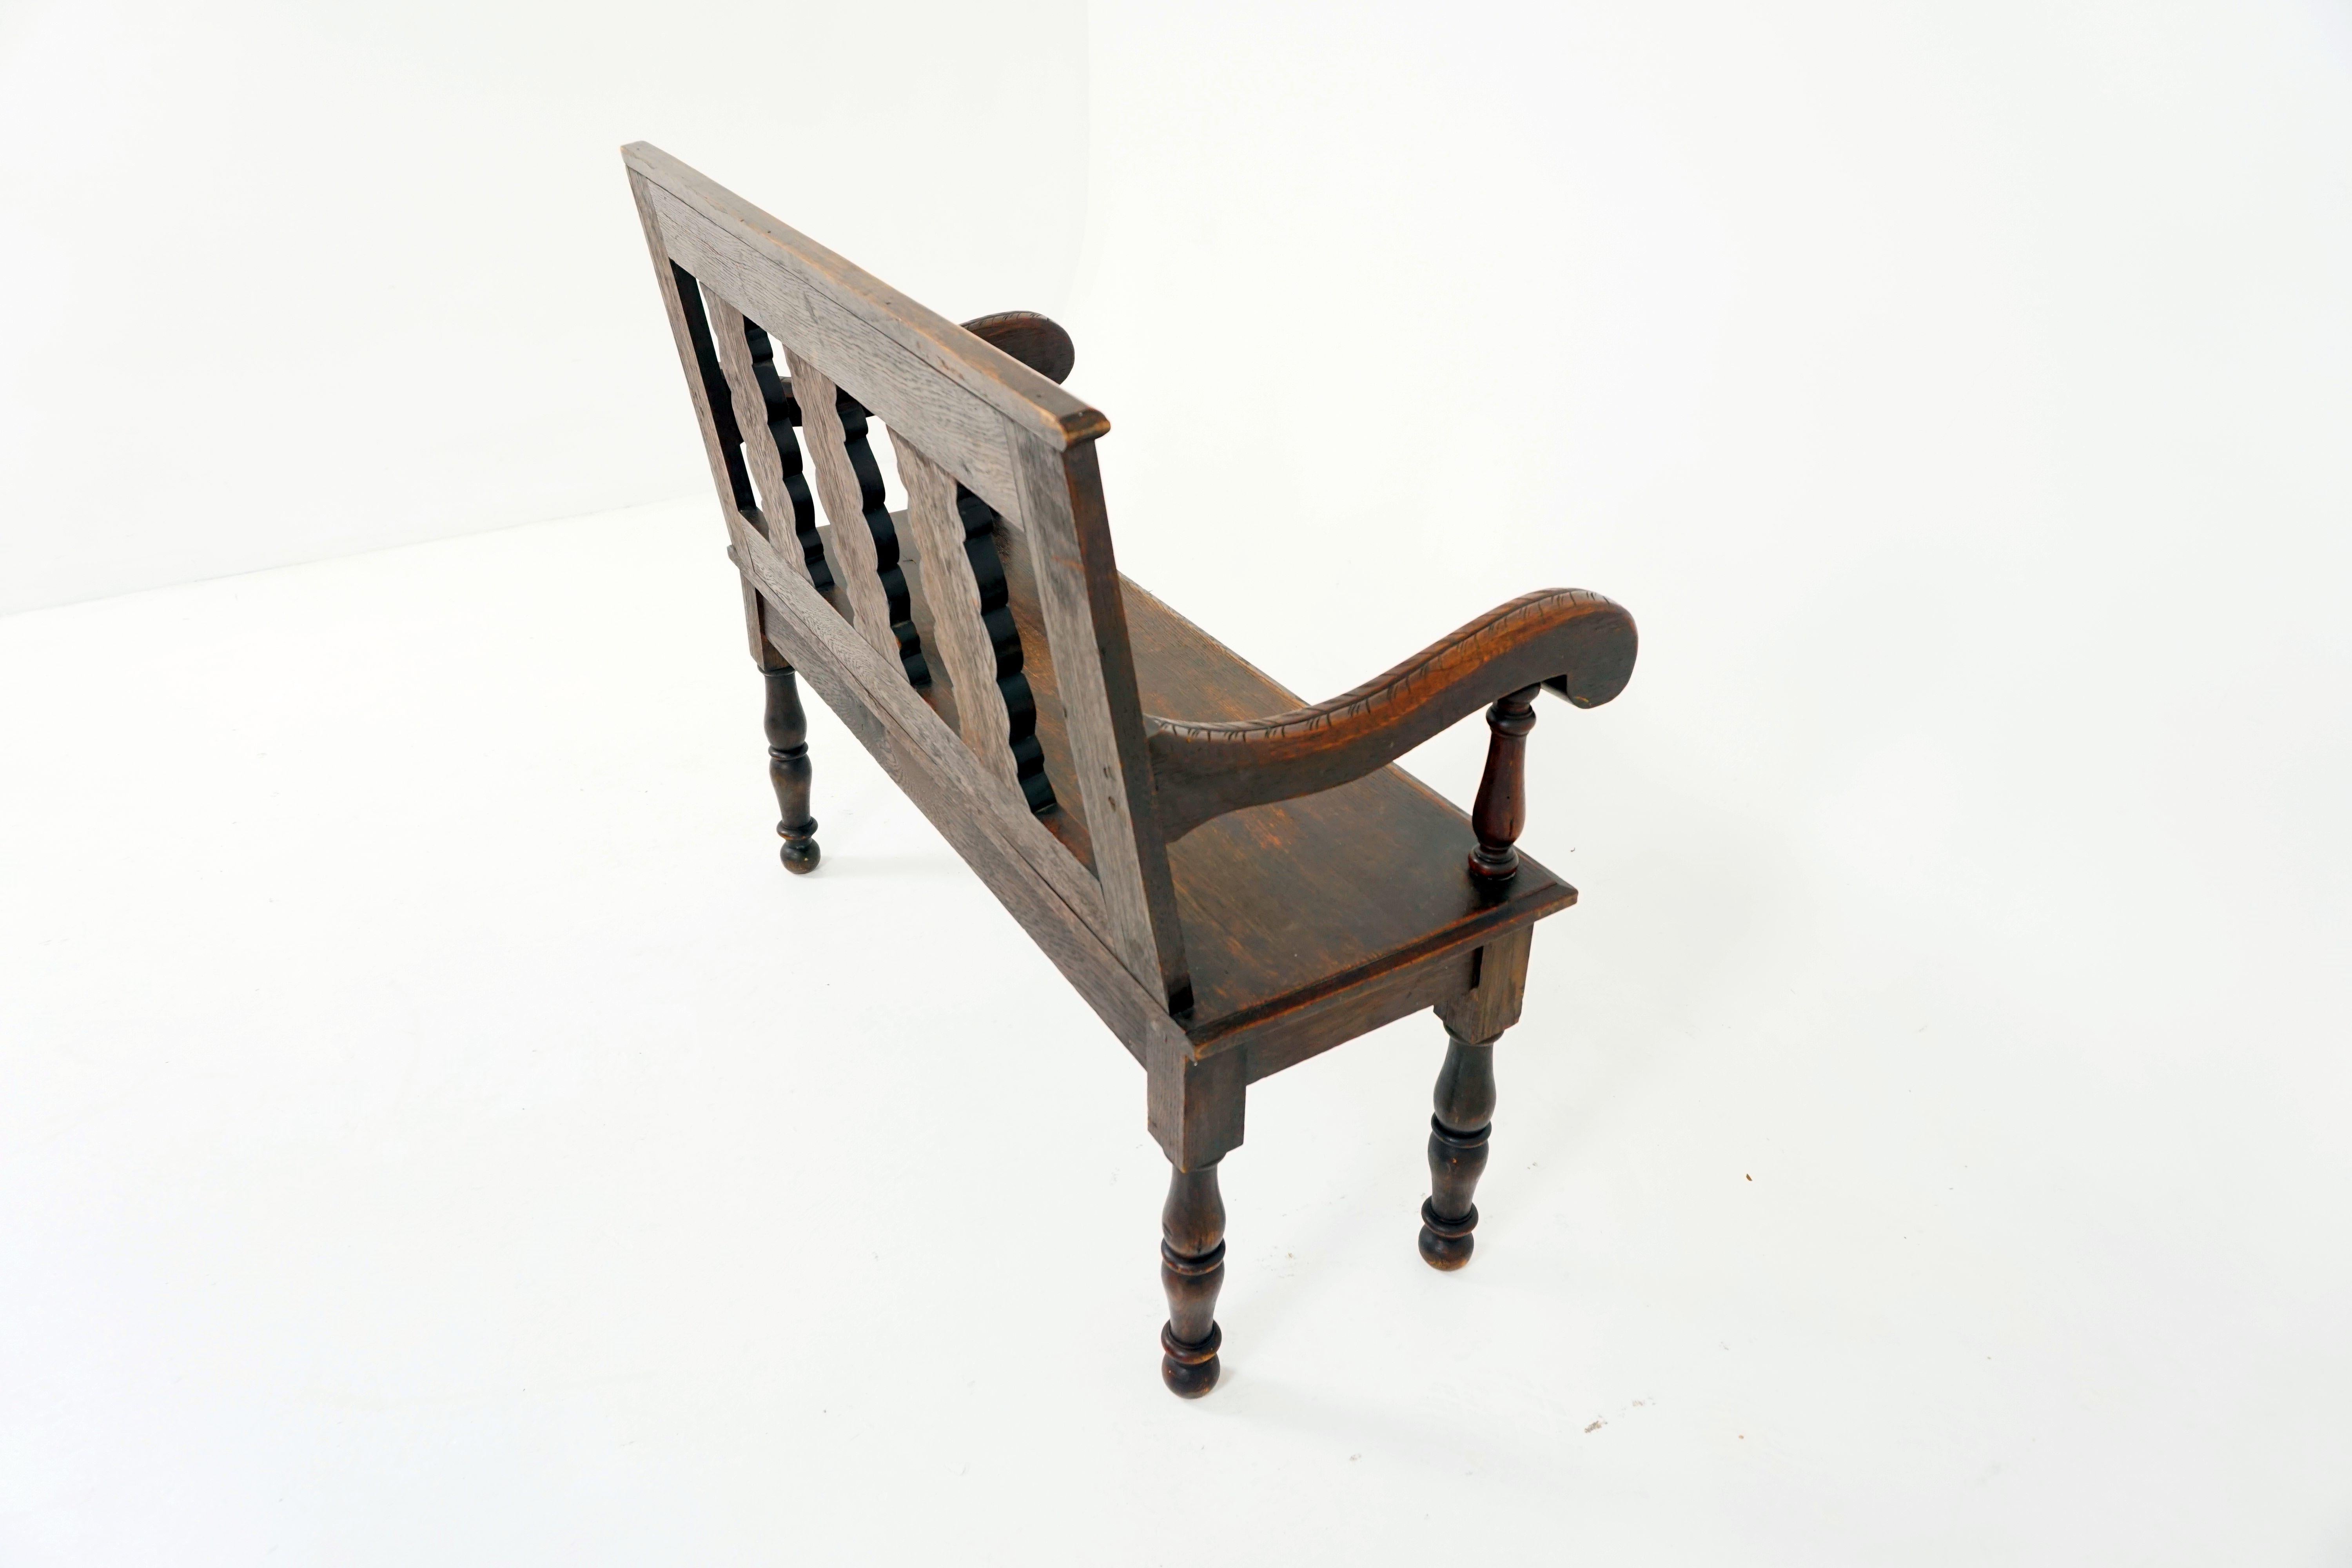 Hand-Crafted Antique Victorian Bench, Carved Oak Hall Bench or Seat, Scotland 1880, B1860